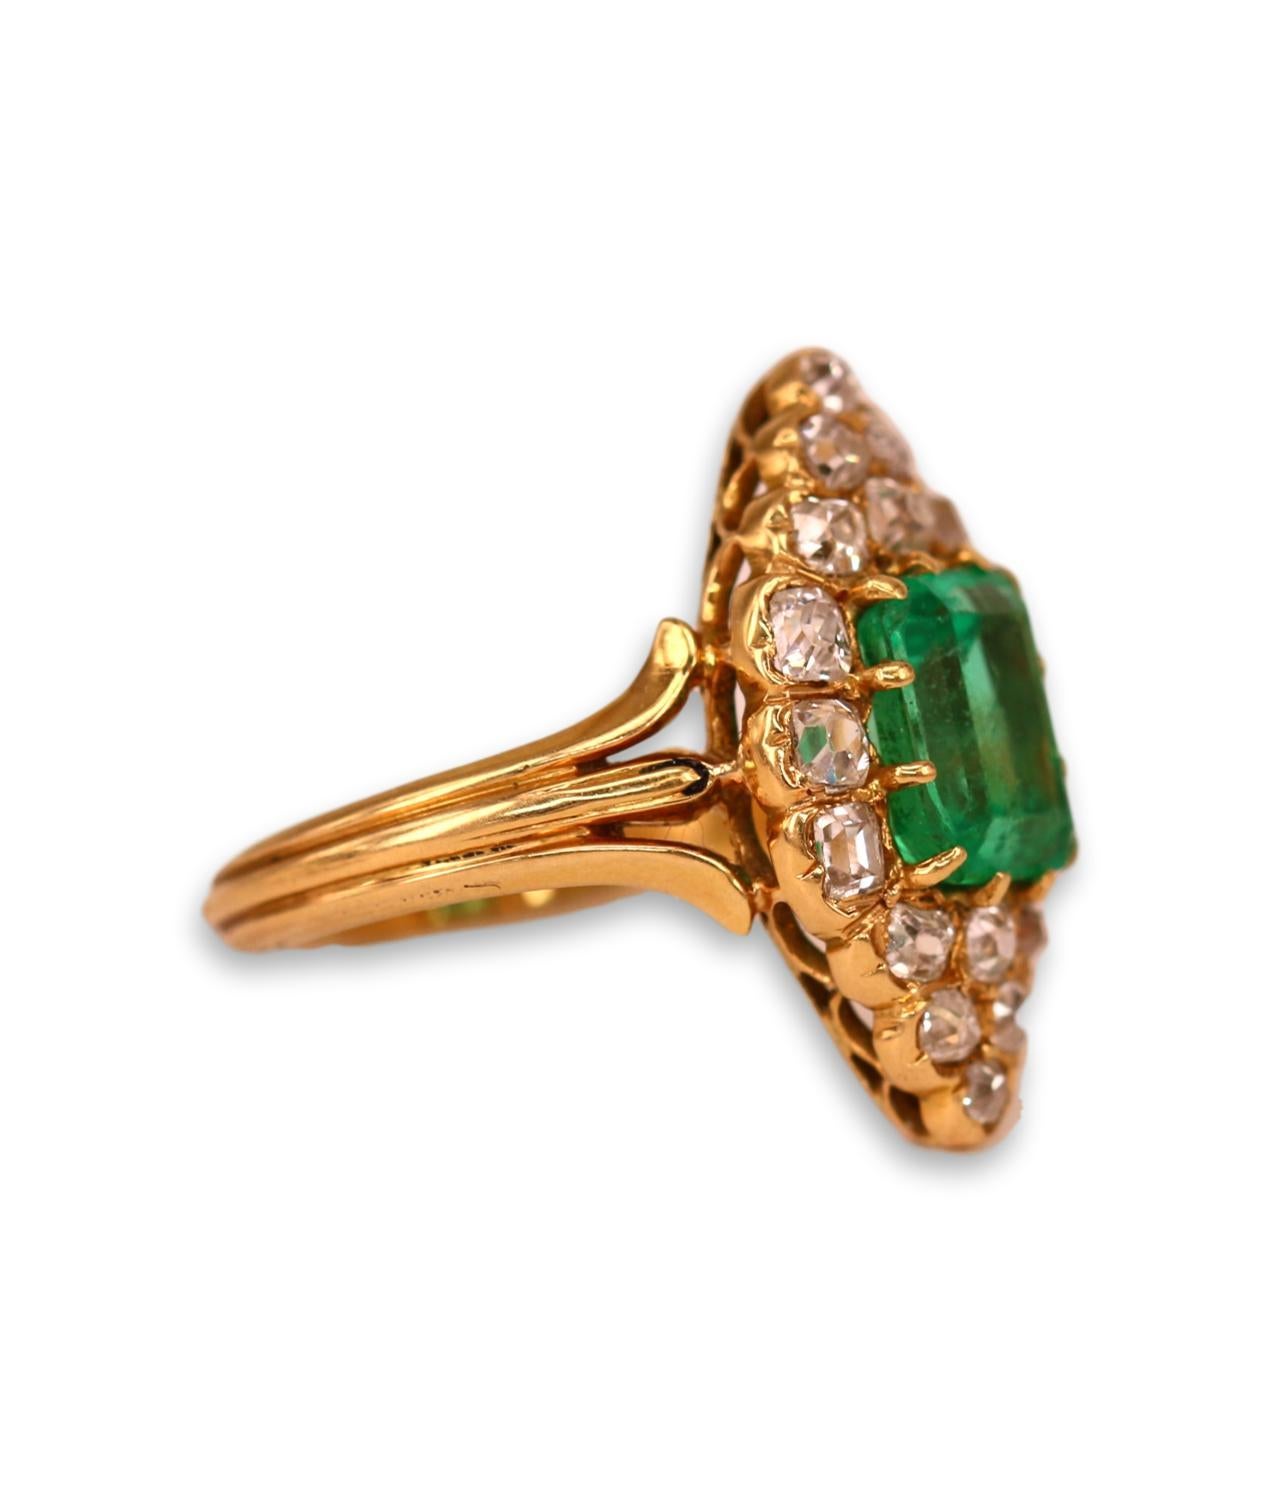 Emerald Cut Victorian Natural Colombian Emerald and Diamond Ring